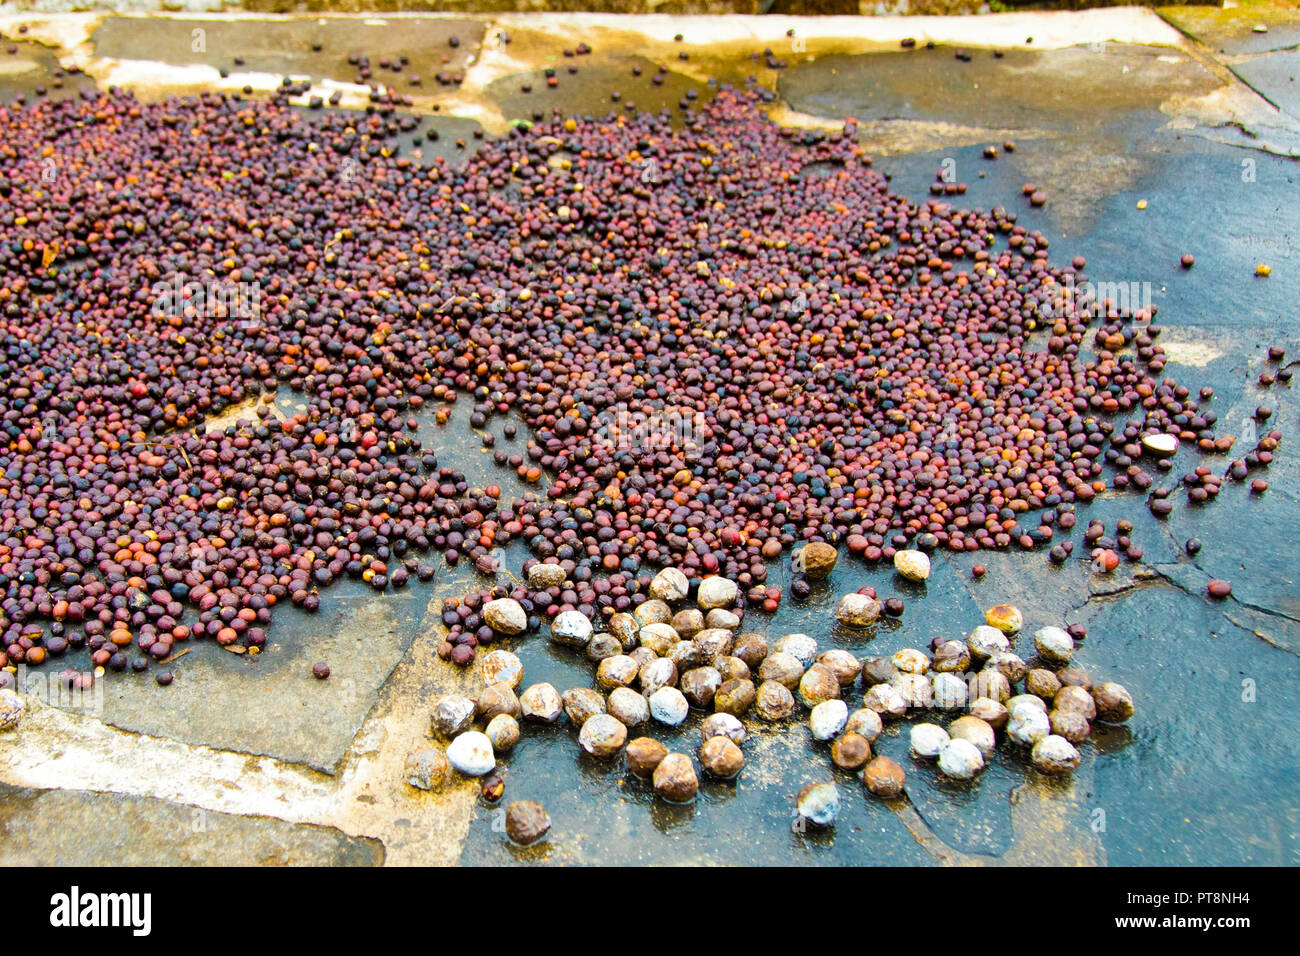 Coffee dries freshly harvested in Indonesia. When imported into Australia, it must be declared Stock Photo